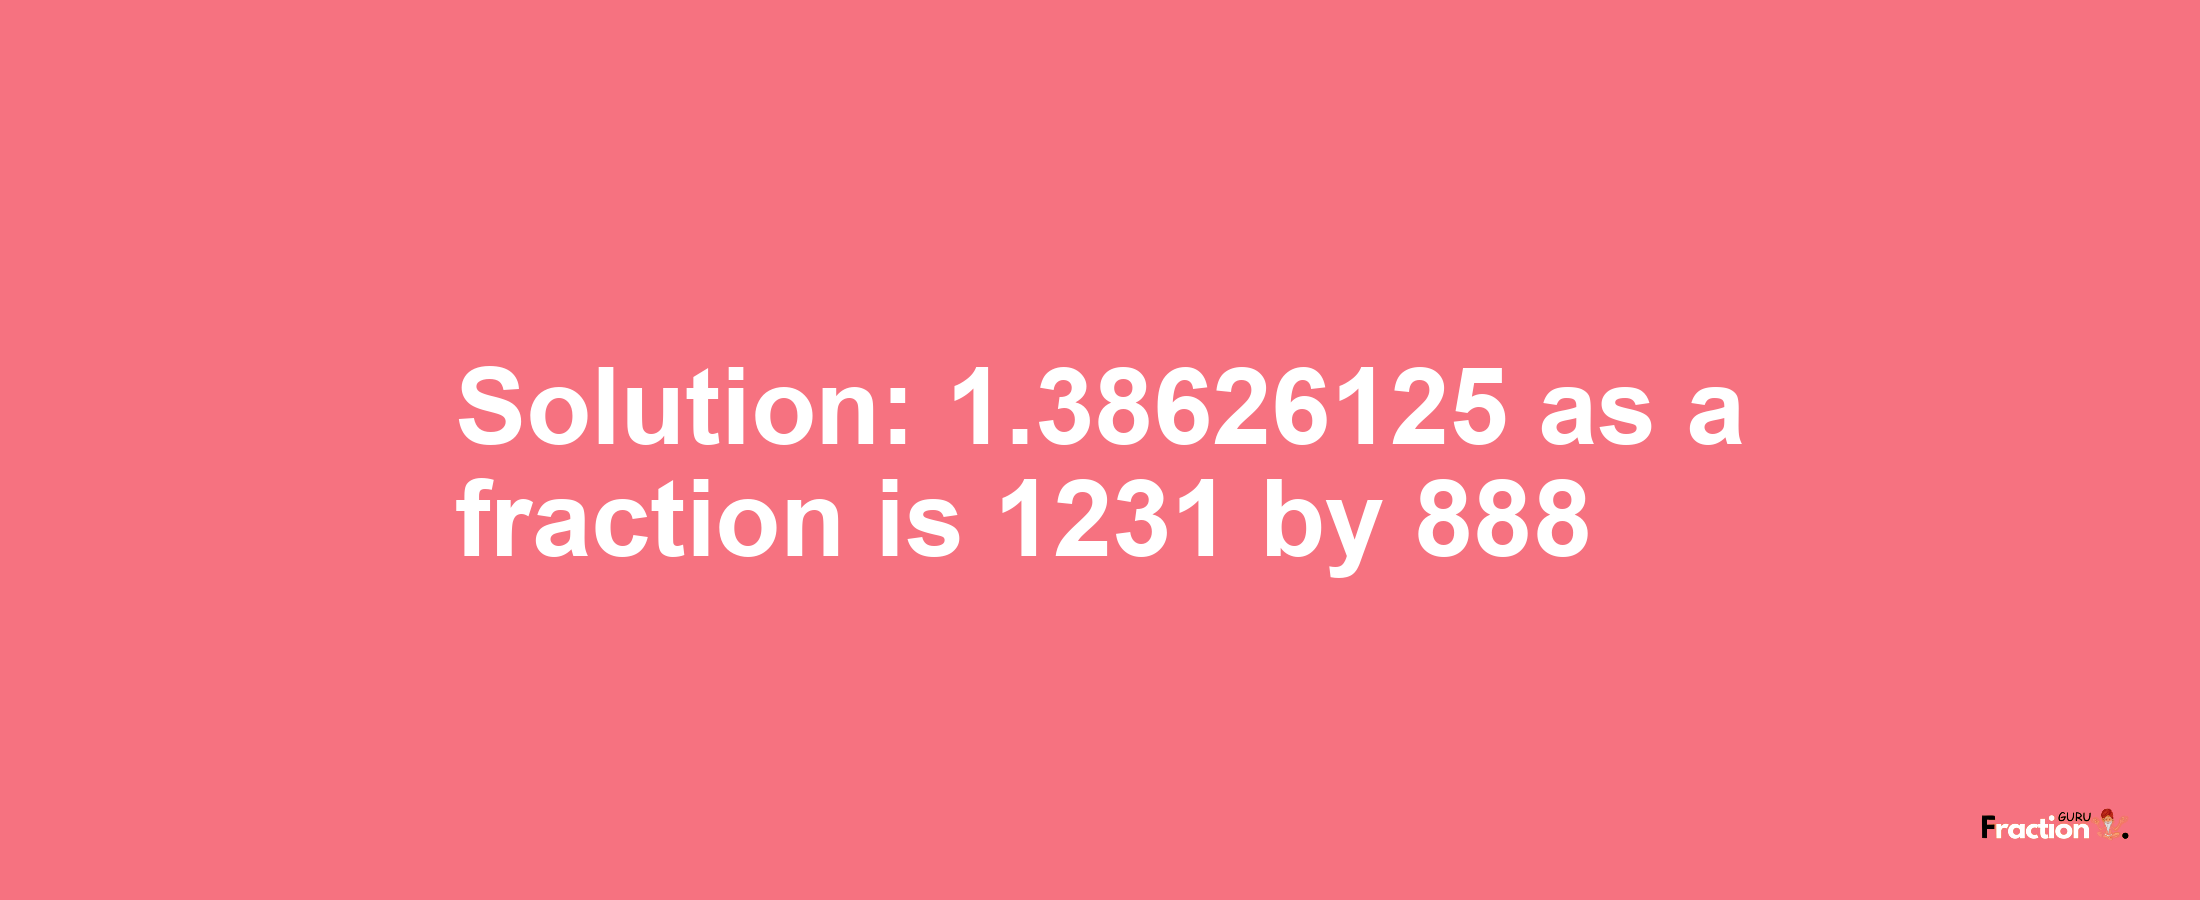 Solution:1.38626125 as a fraction is 1231/888